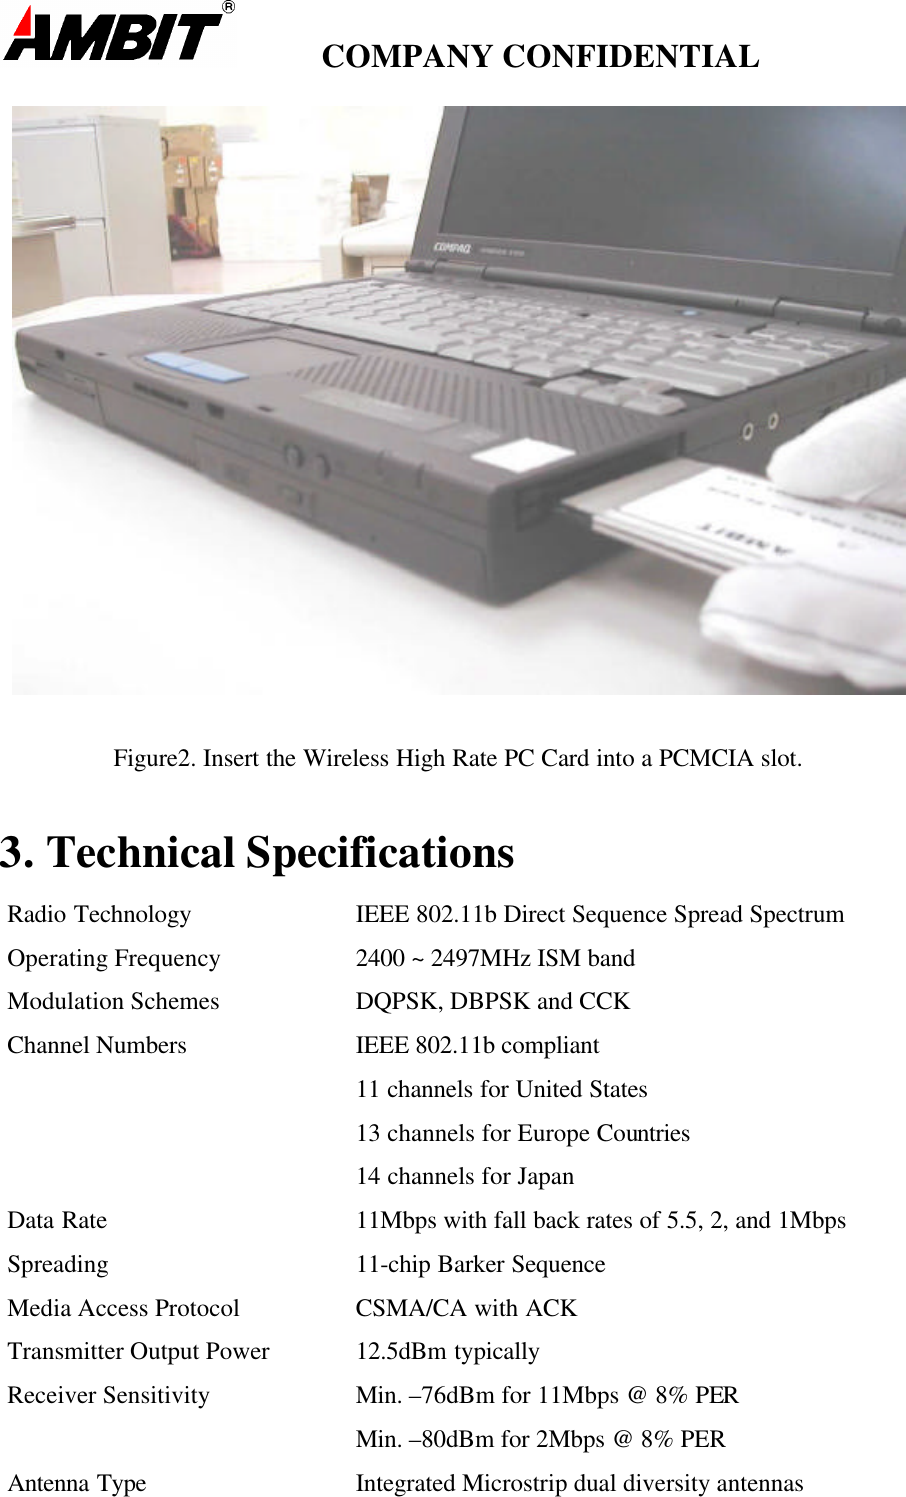         COMPANY CONFIDENTIALFigure2. Insert the Wireless High Rate PC Card into a PCMCIA slot.3. Technical SpecificationsRadio Technology IEEE 802.11b Direct Sequence Spread SpectrumOperating Frequency 2400 ~ 2497MHz ISM bandModulation Schemes DQPSK, DBPSK and CCKChannel Numbers IEEE 802.11b compliant11 channels for United States13 channels for Europe Countries14 channels for JapanData Rate 11Mbps with fall back rates of 5.5, 2, and 1MbpsSpreading 11-chip Barker SequenceMedia Access Protocol CSMA/CA with ACKTransmitter Output Power 12.5dBm typicallyReceiver Sensitivity Min. –76dBm for 11Mbps @ 8% PERMin. –80dBm for 2Mbps @ 8% PERAntenna Type Integrated Microstrip dual diversity antennas